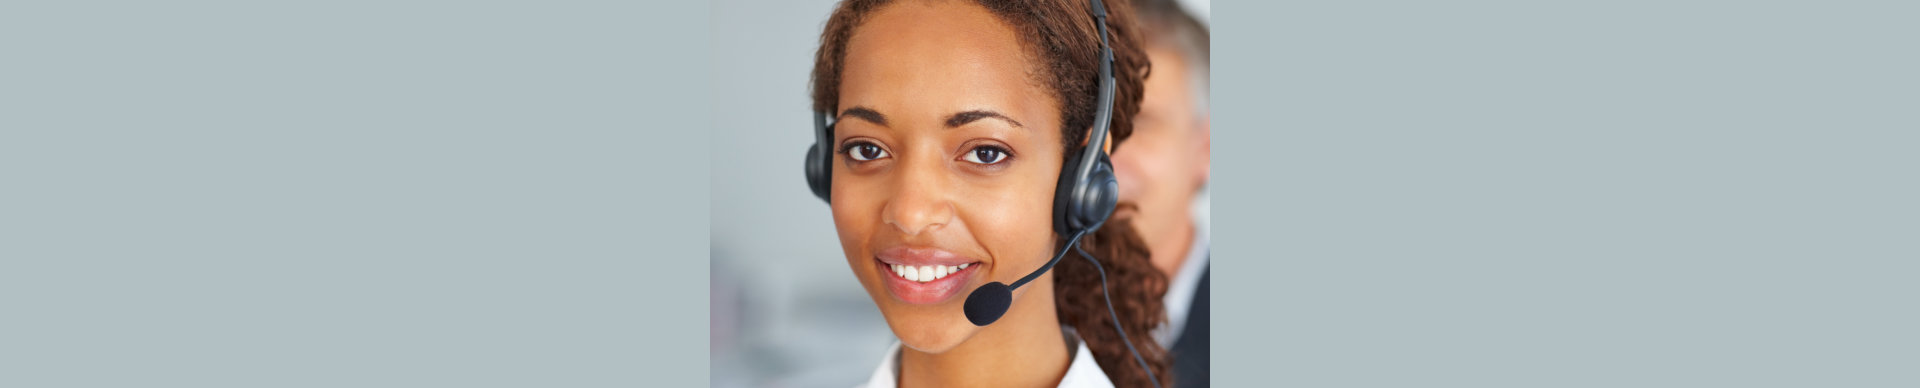 call center agent on call